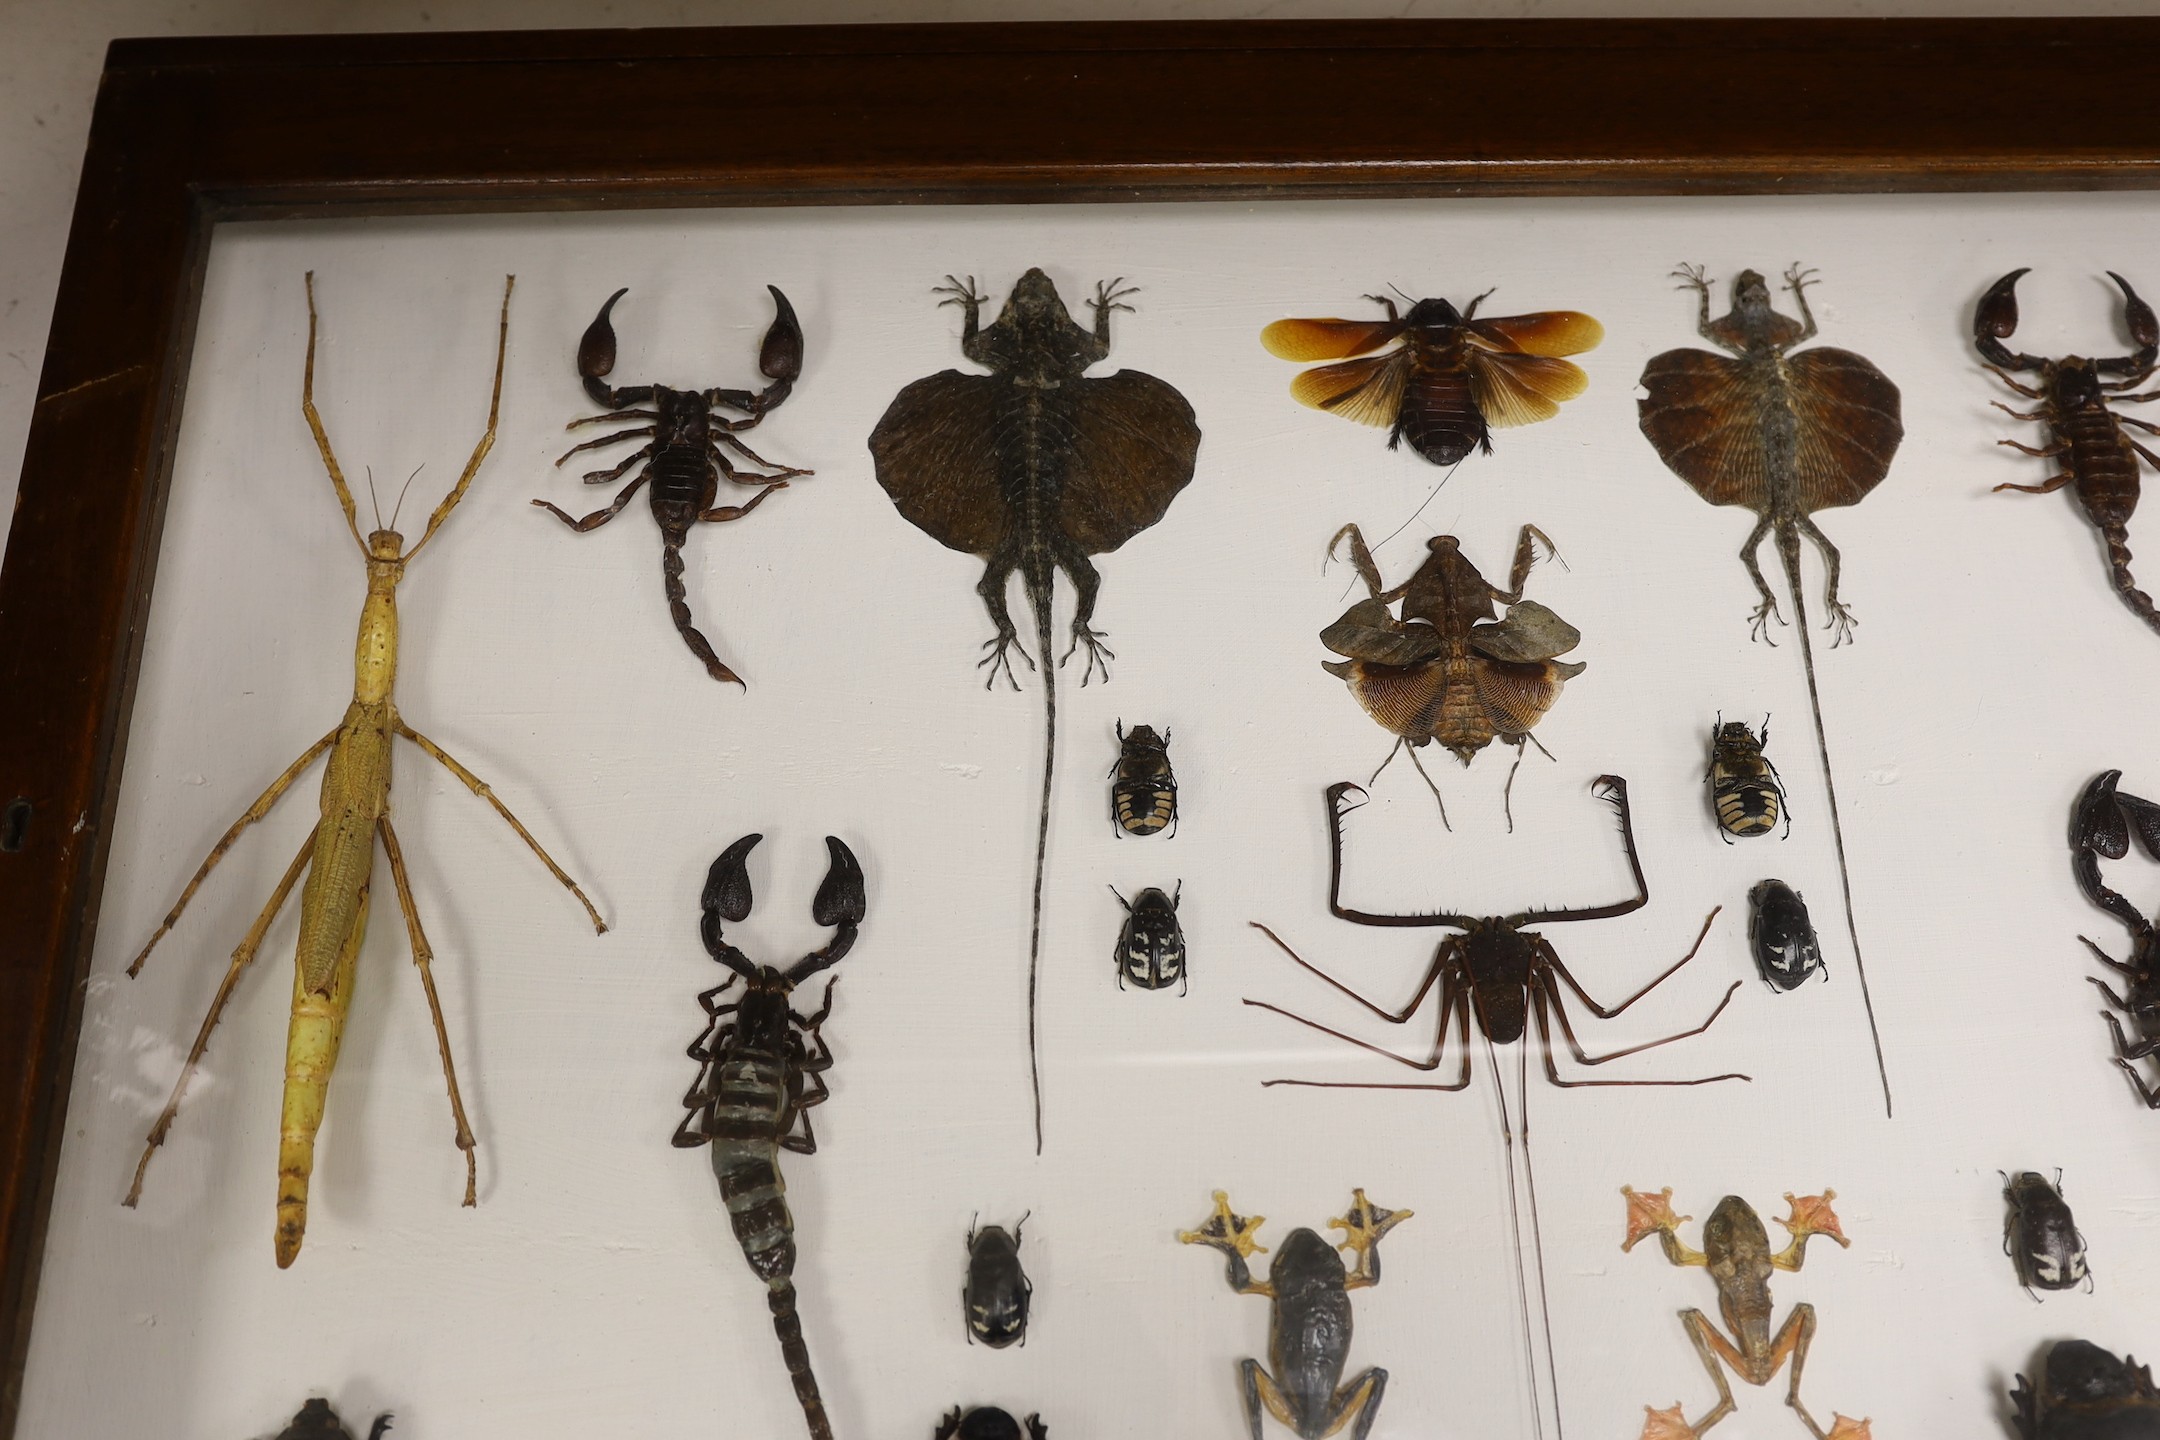 Entomology- a cased taxidermy display of tree frogs, scorpions, stick insects, beetles and flying lizards